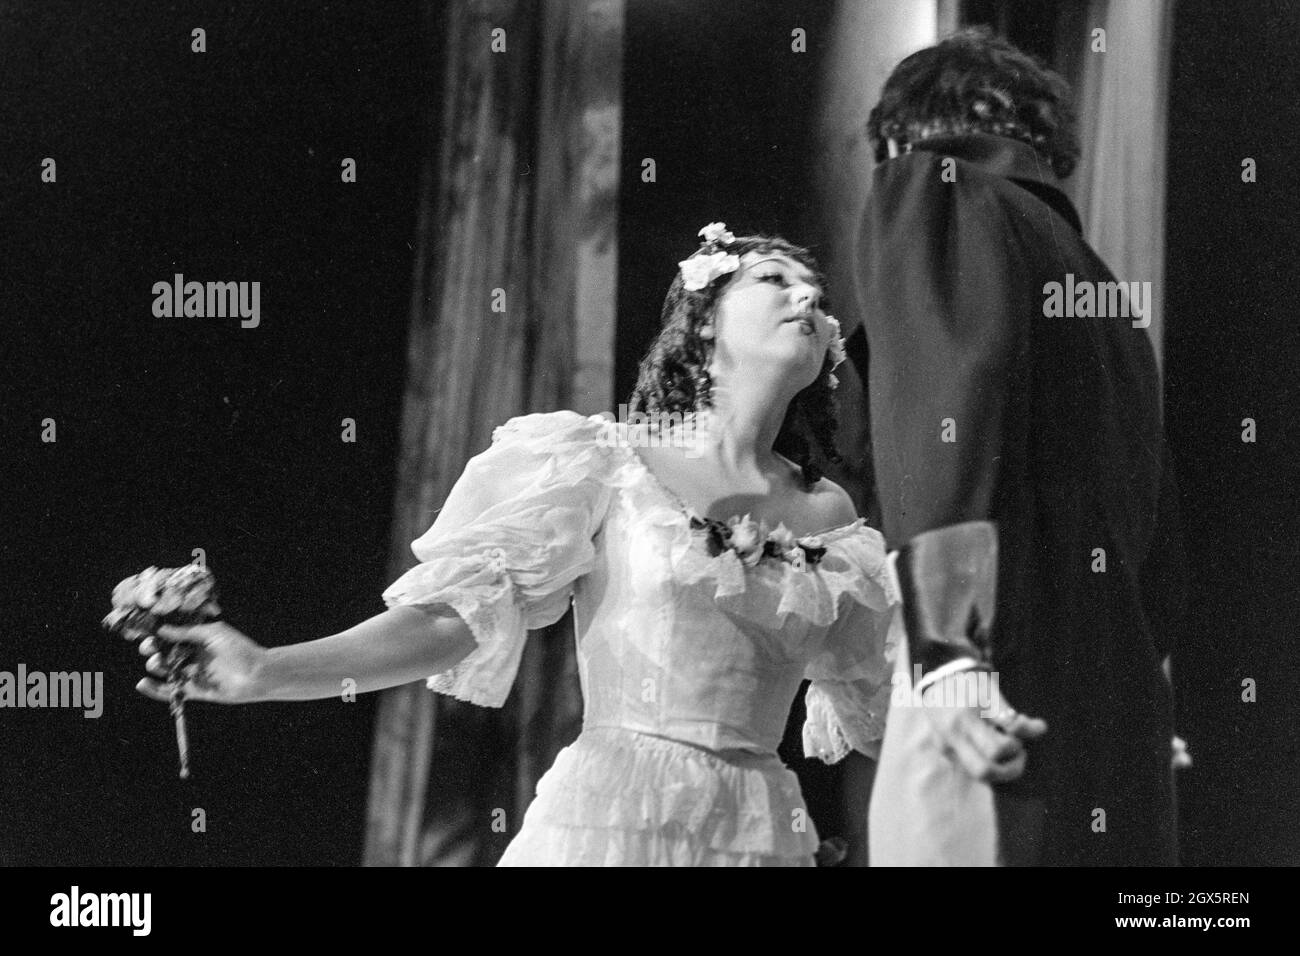 Birgitta andersson and martin Ljung acting on stage in stockholm. 1950s photo: Bo Arrhed Stock Photo